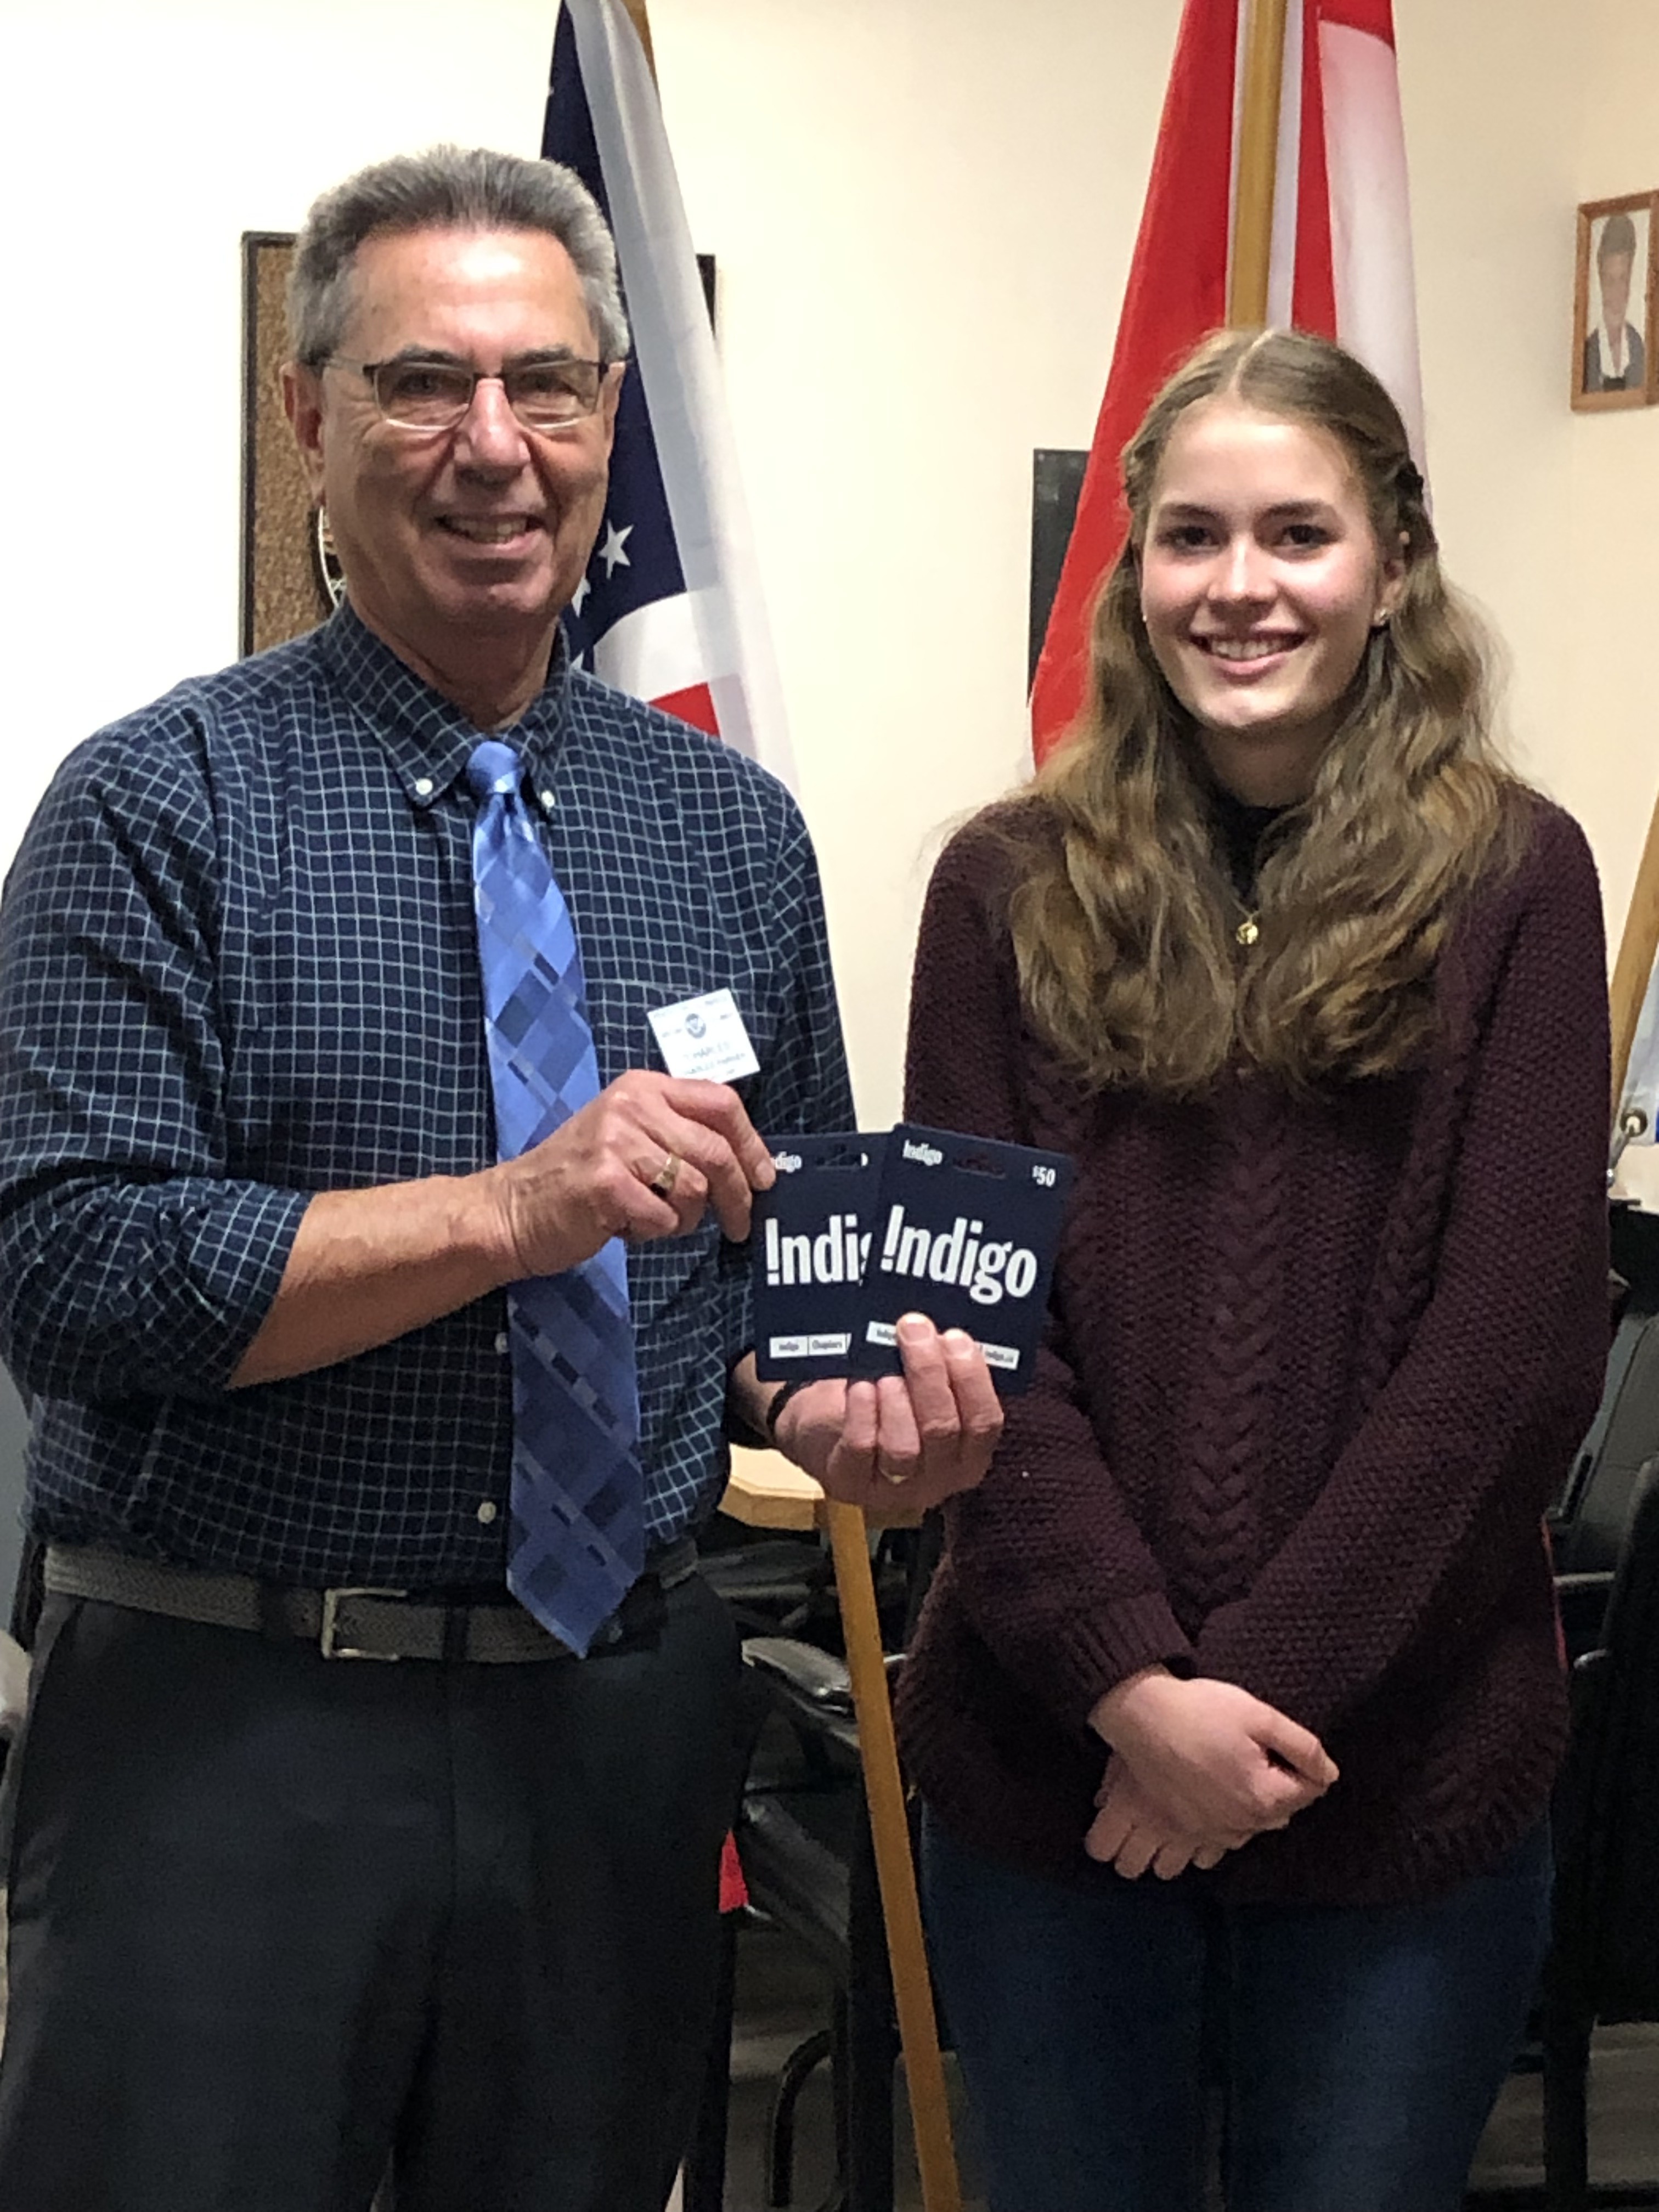 President Charles presents Meredith with Indigo gift certificates.